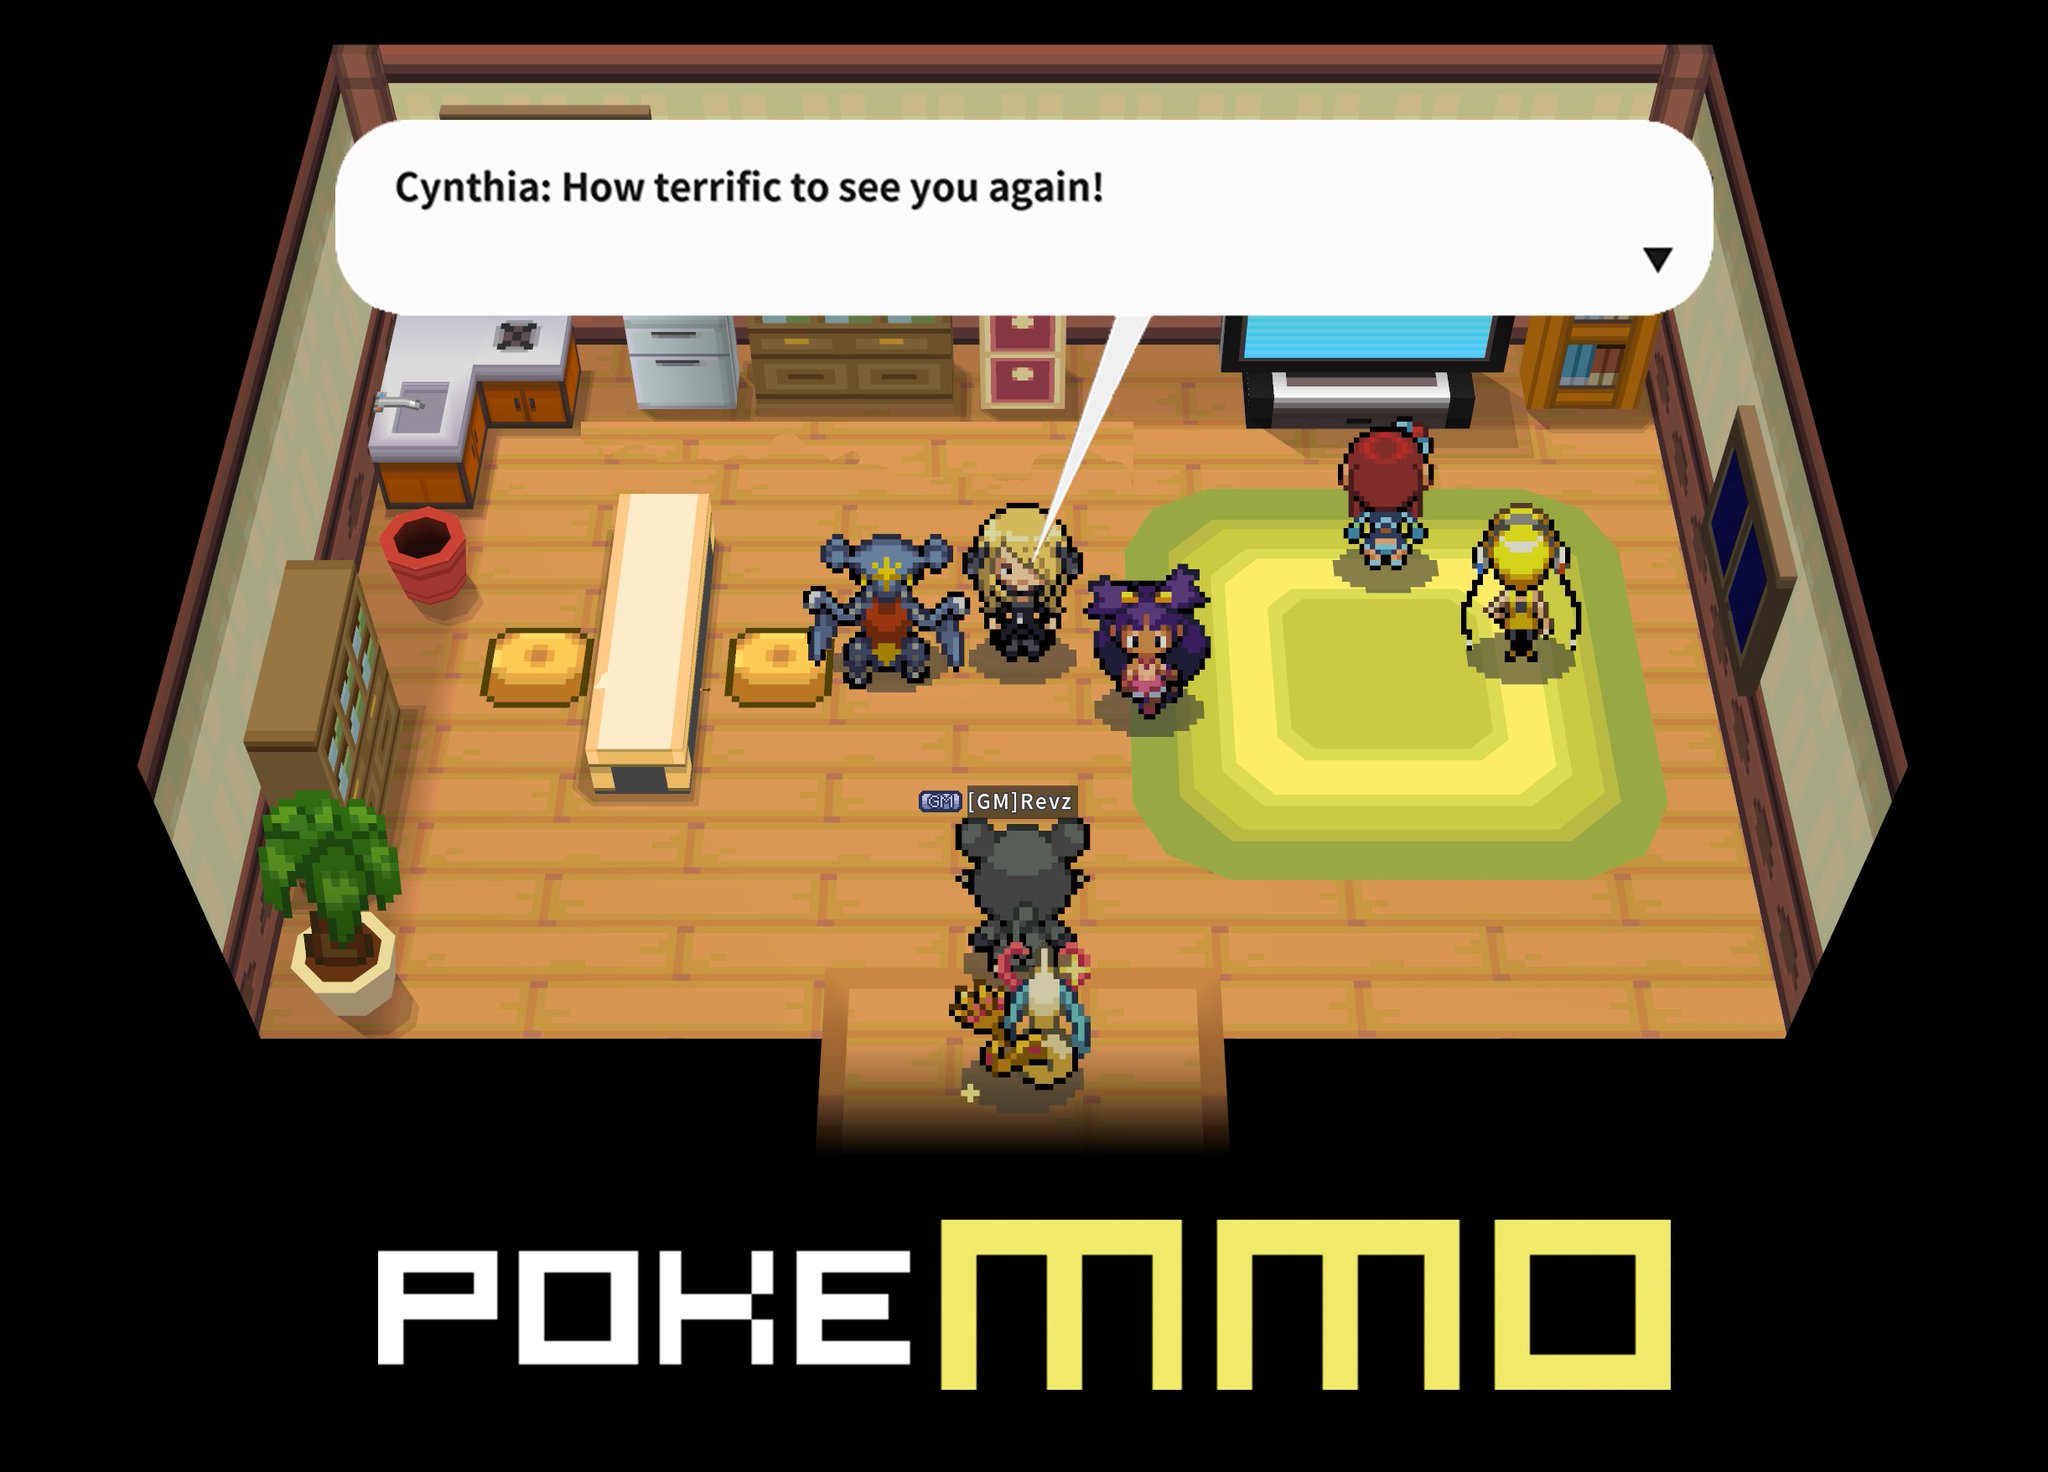 PokeMMO - Do you want to raise the happiness of your